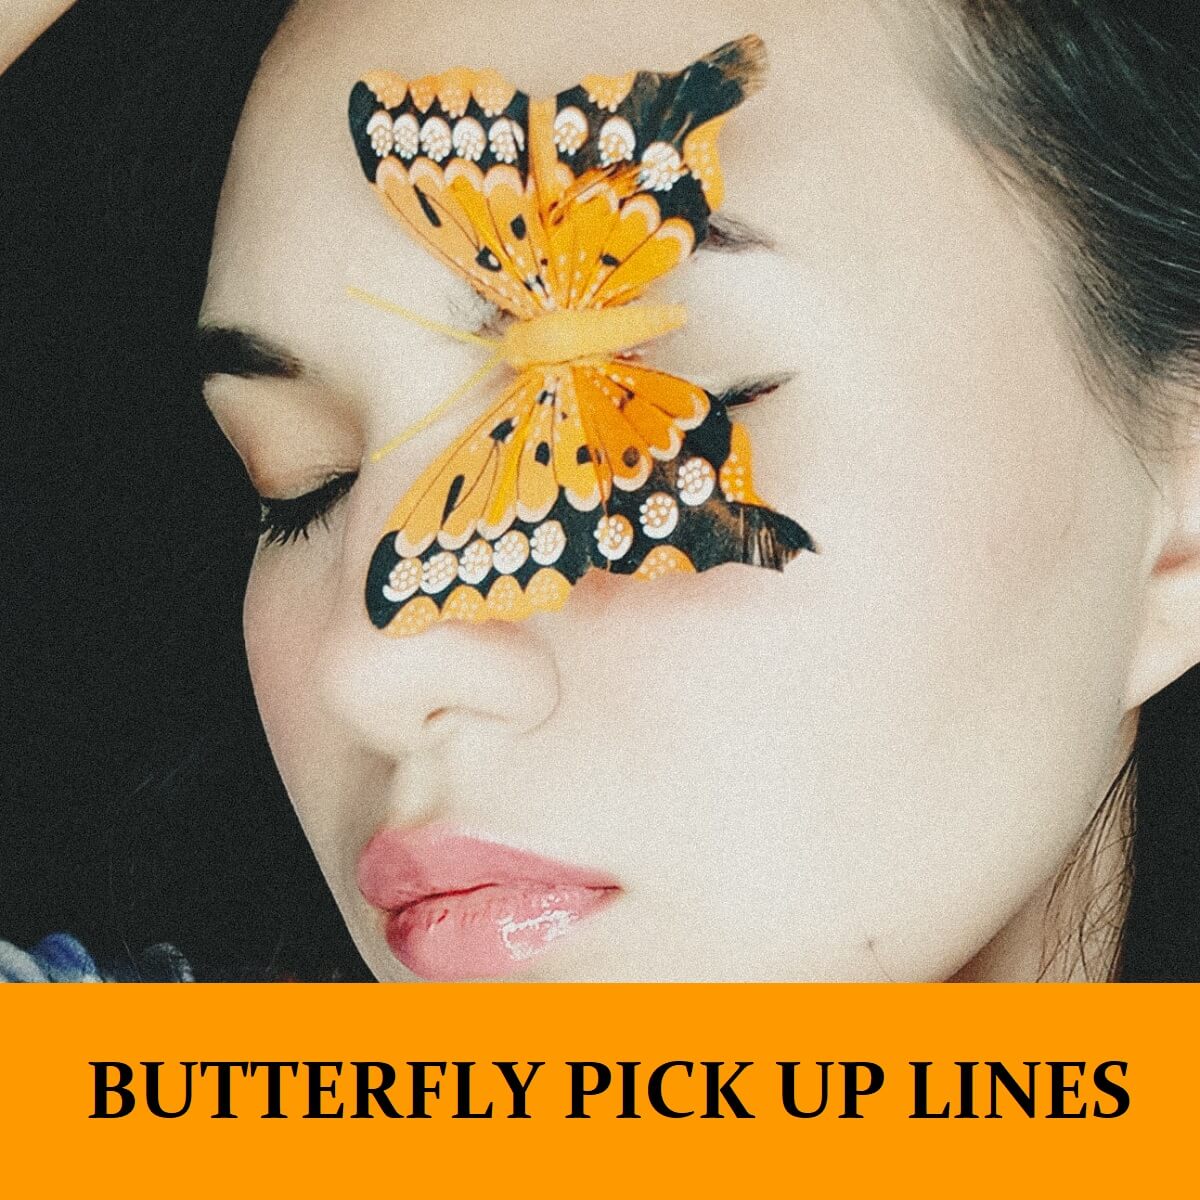 25 Butterfly Pick Up Lines [Funny, Dirty, Cheesy]